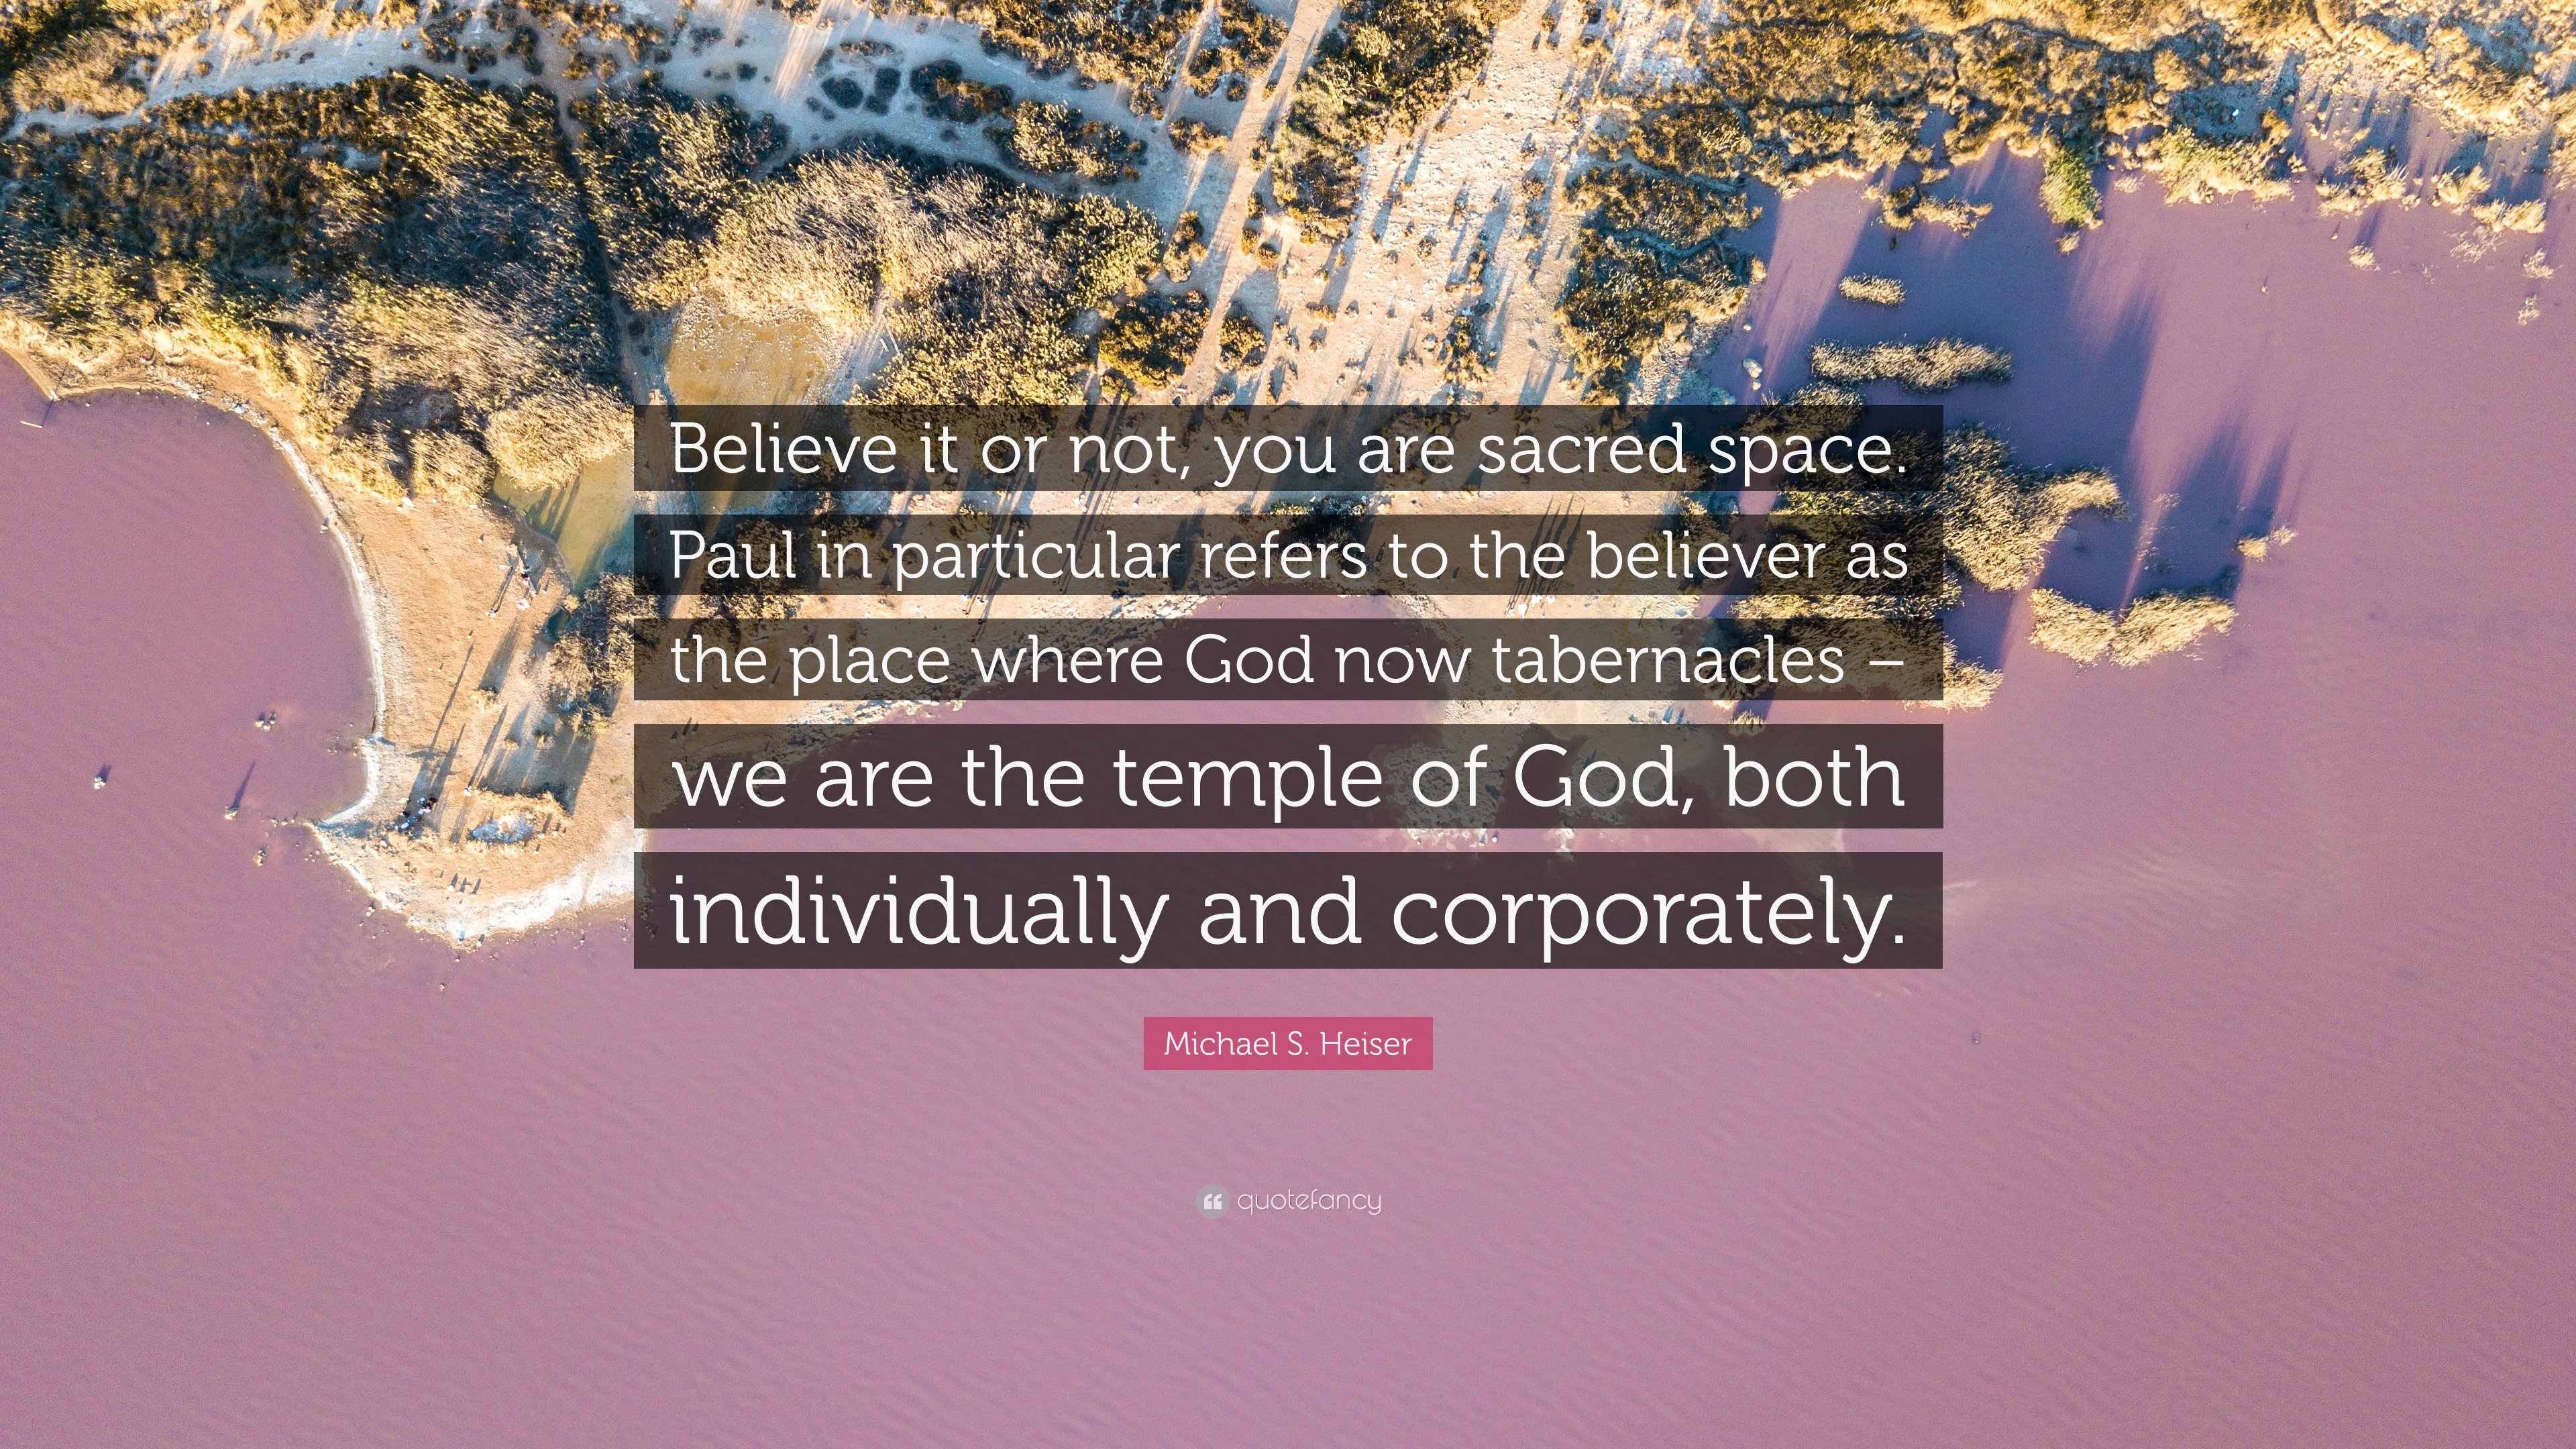 6937149-Michael-S-Heiser-Quote-Believe-it-or-not-you-are-sacred-space-Paul.jpg